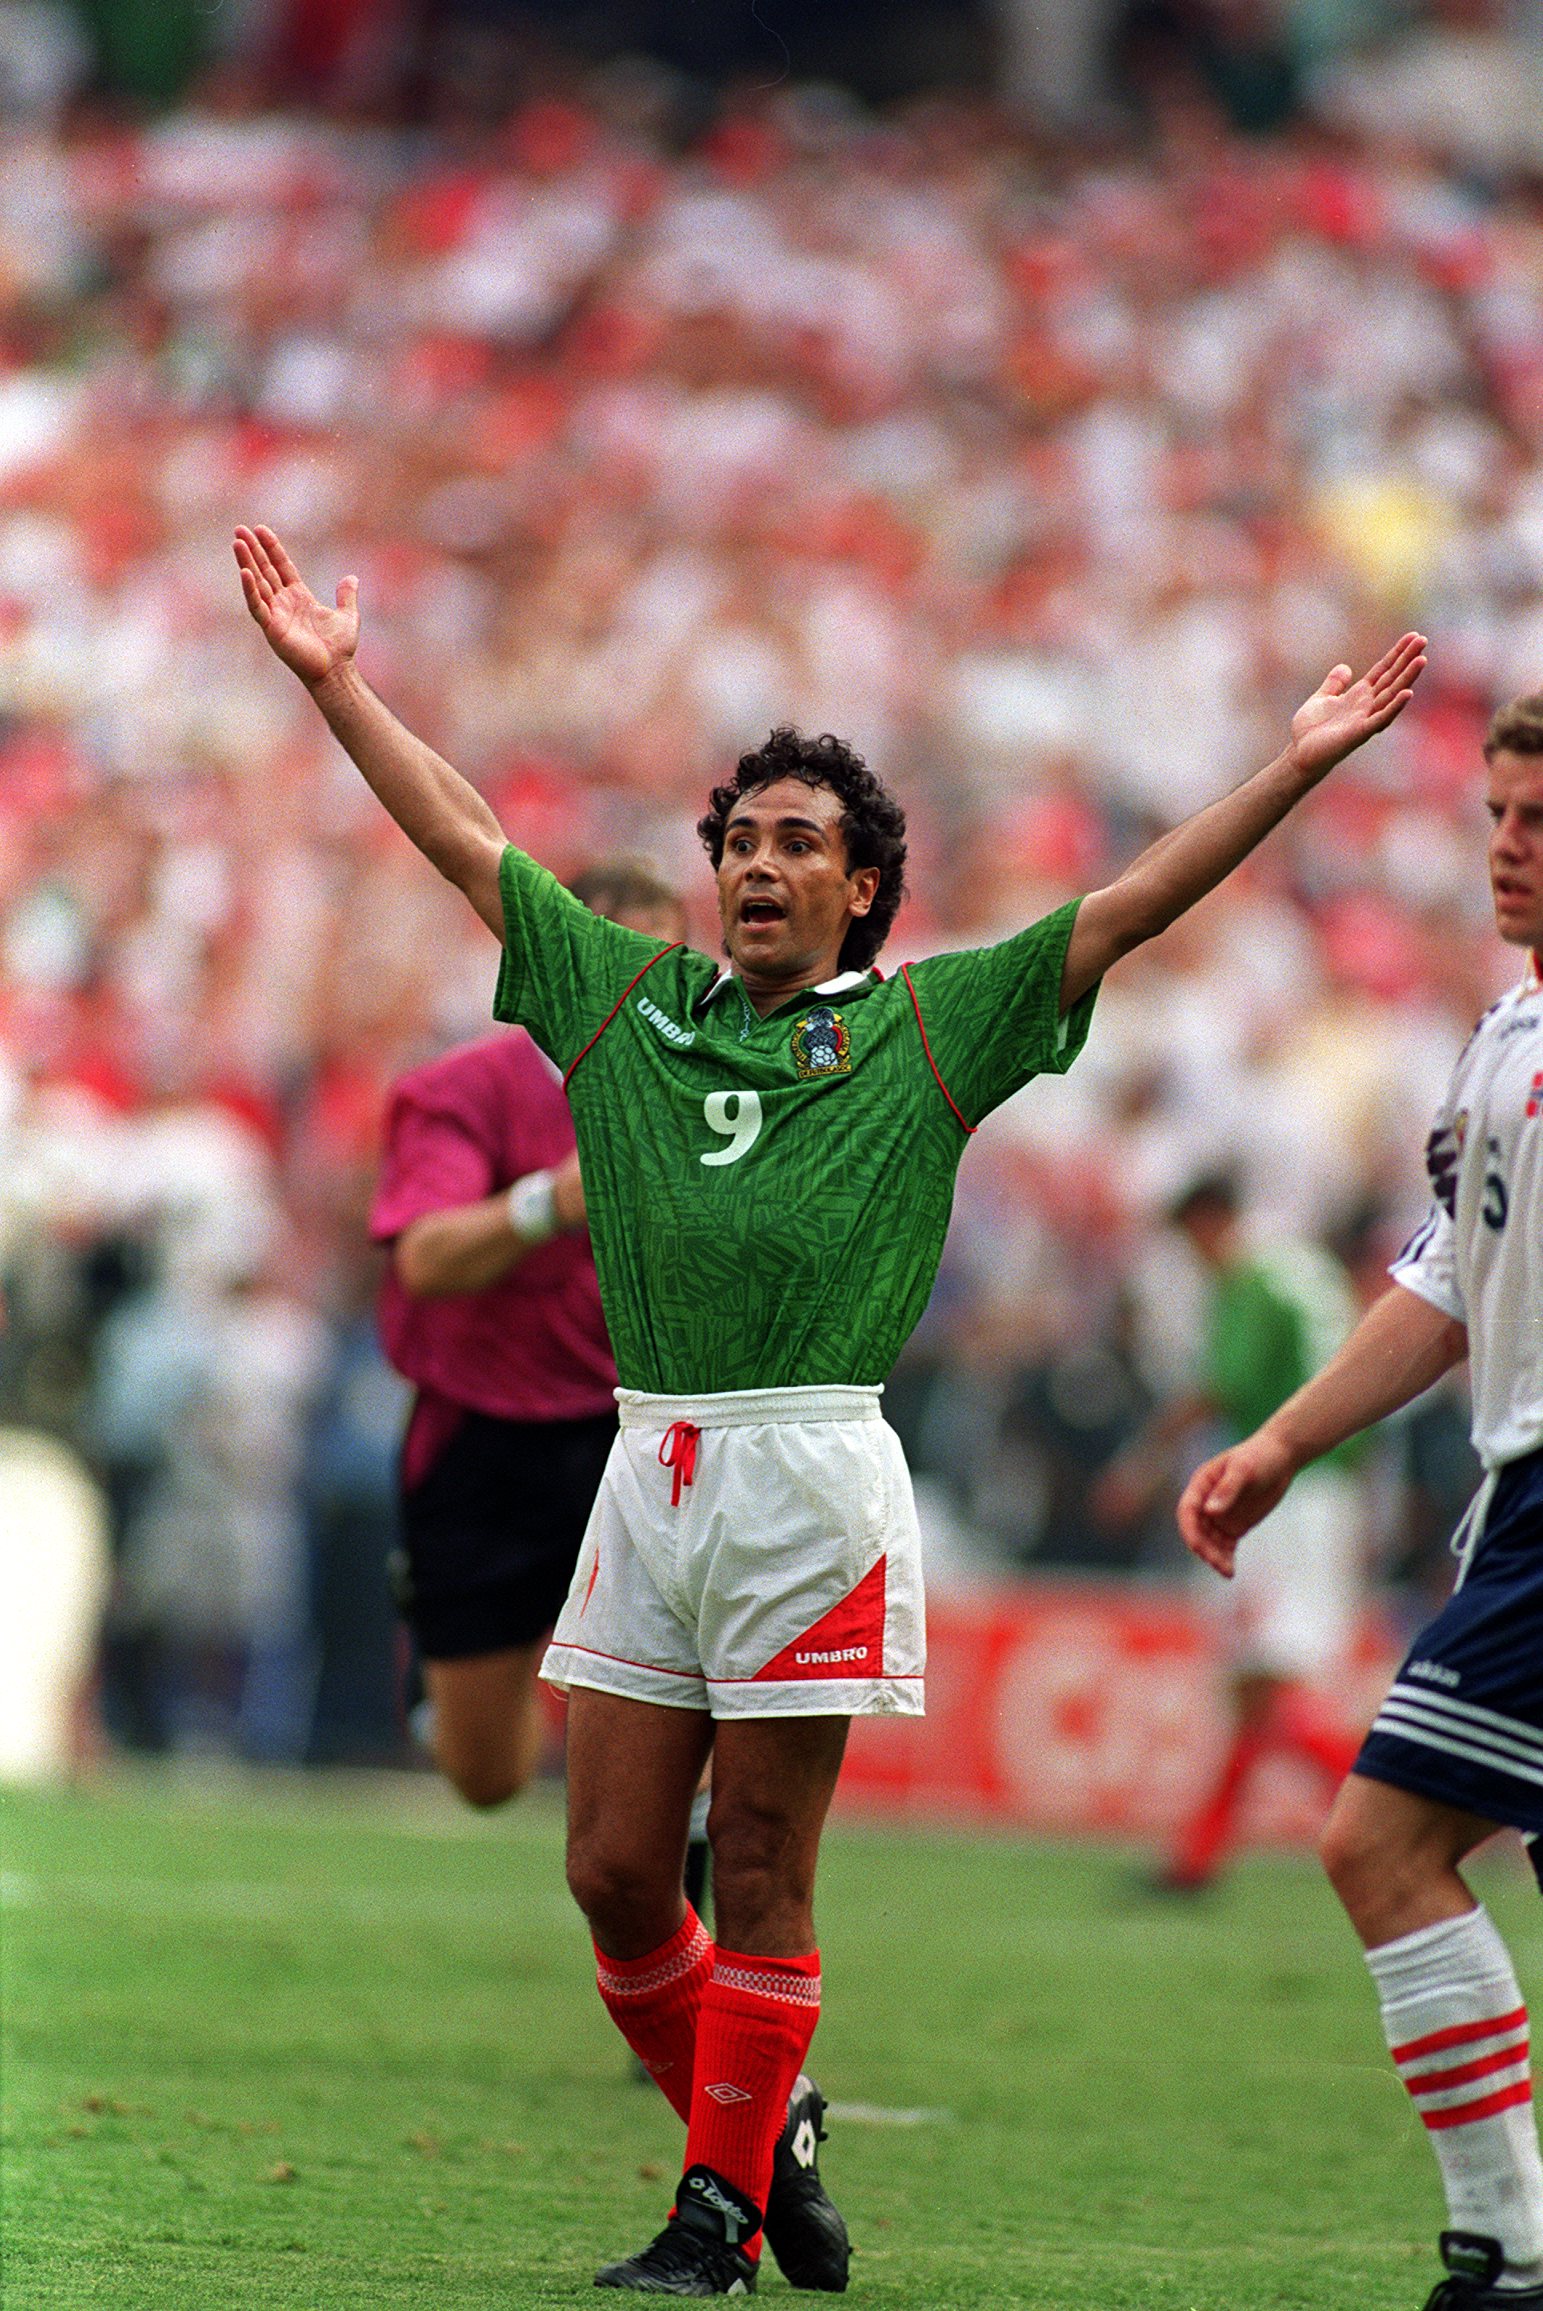 The 100 Greatest Soccer Players in the World Today